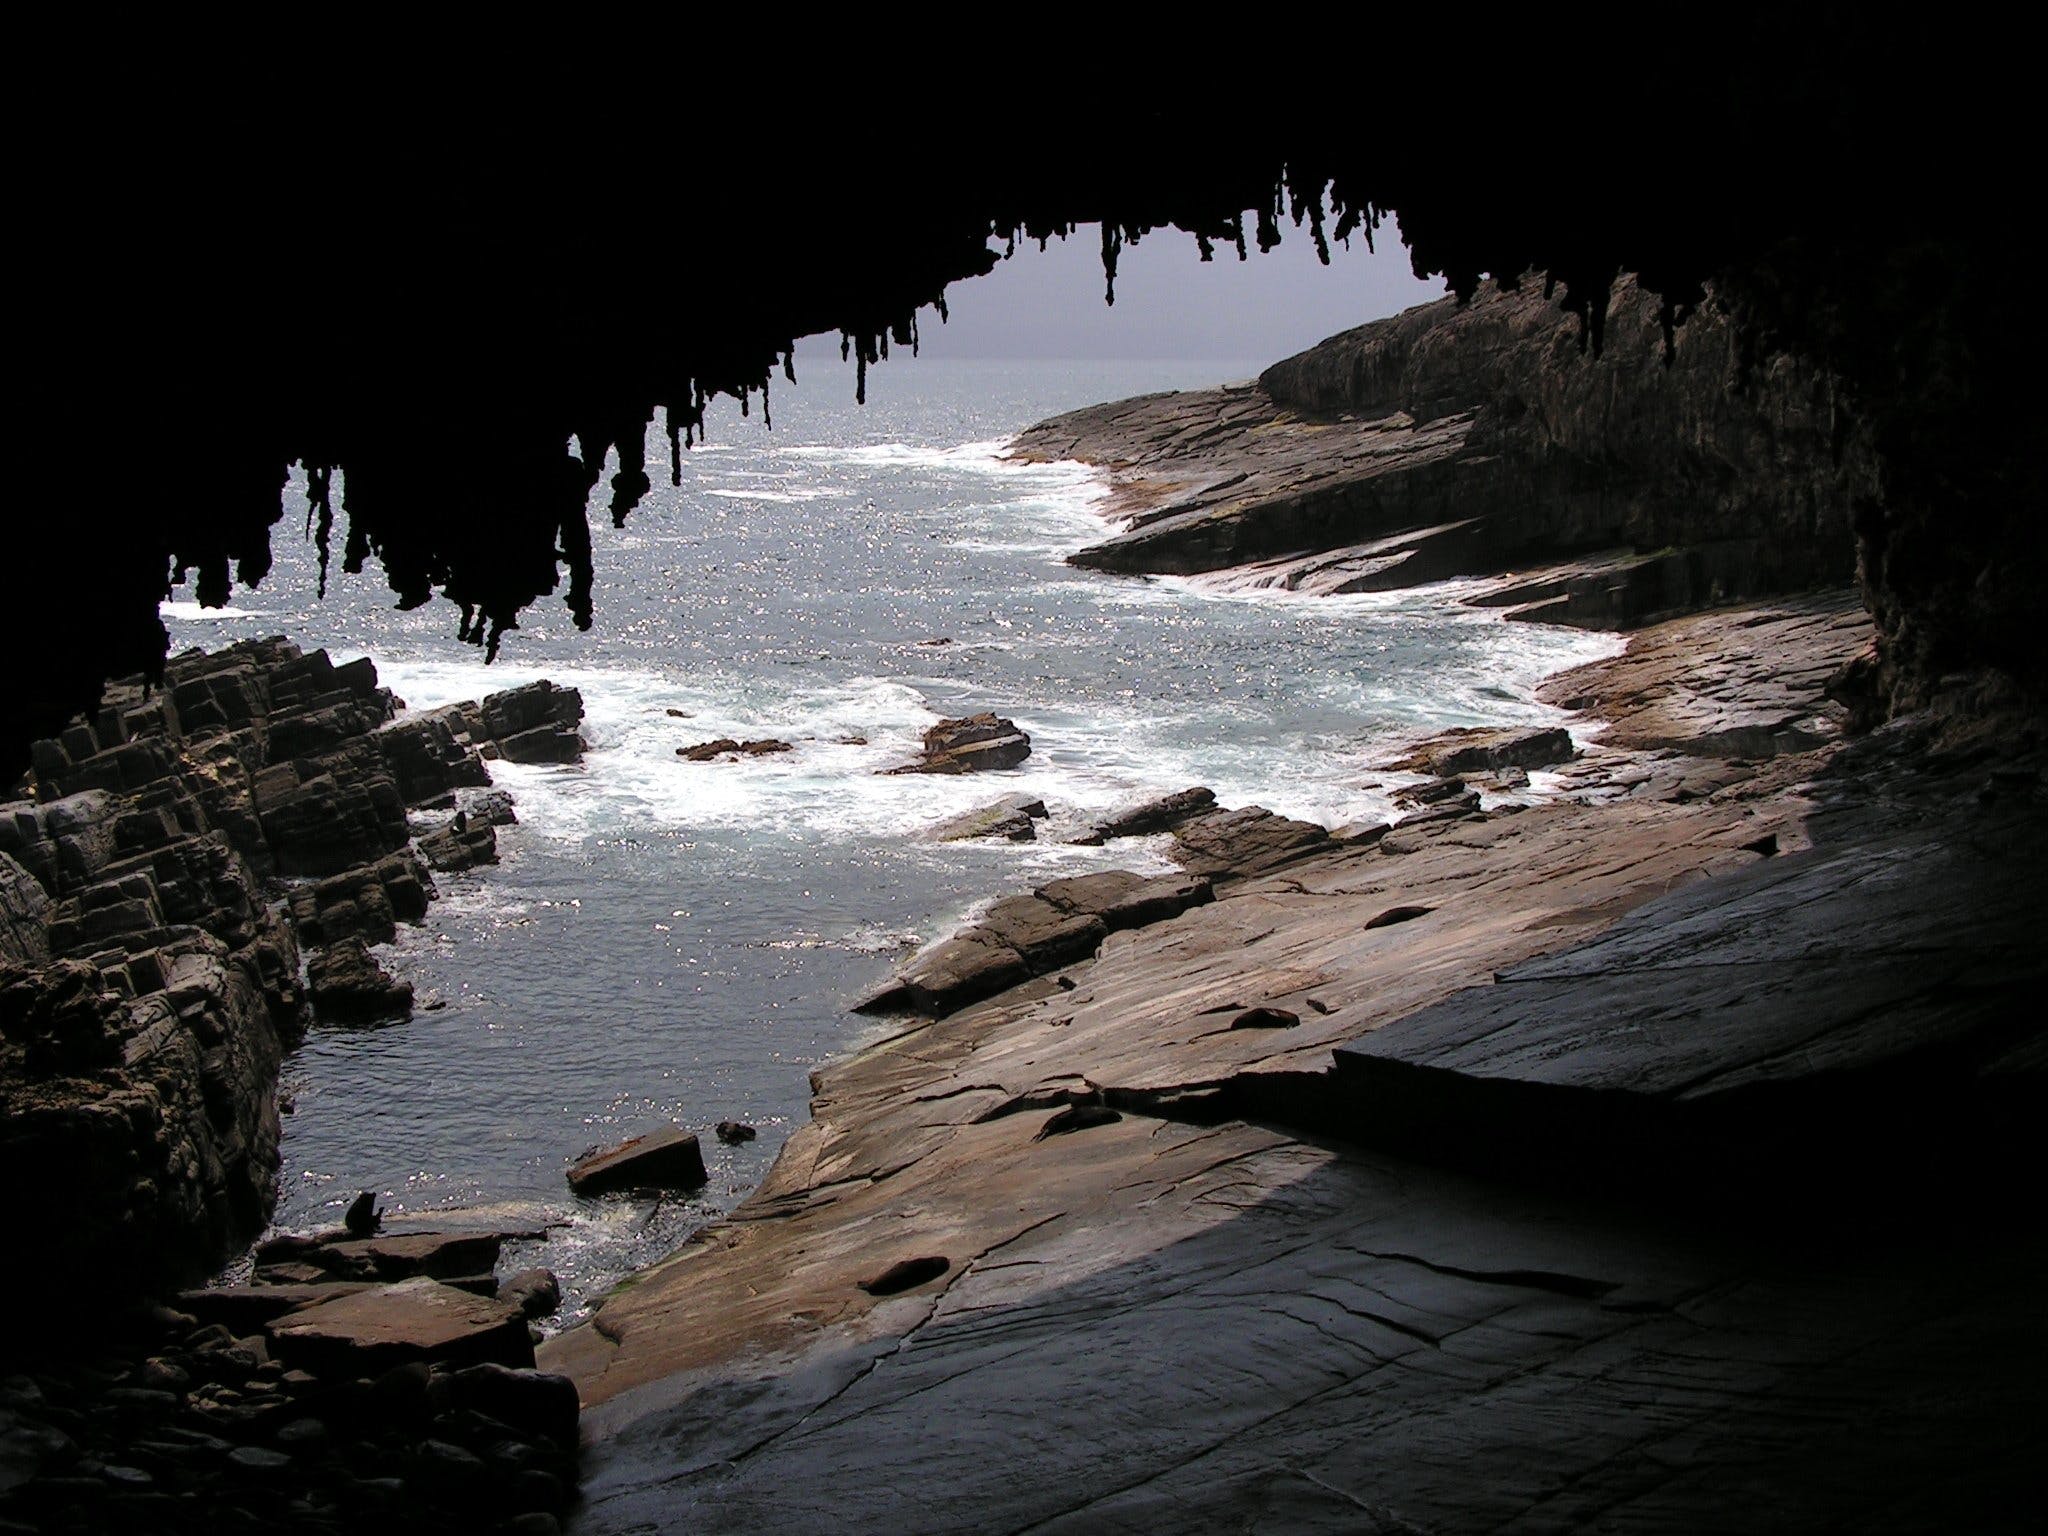 Admirals Arch - Accommodation Nelson Bay